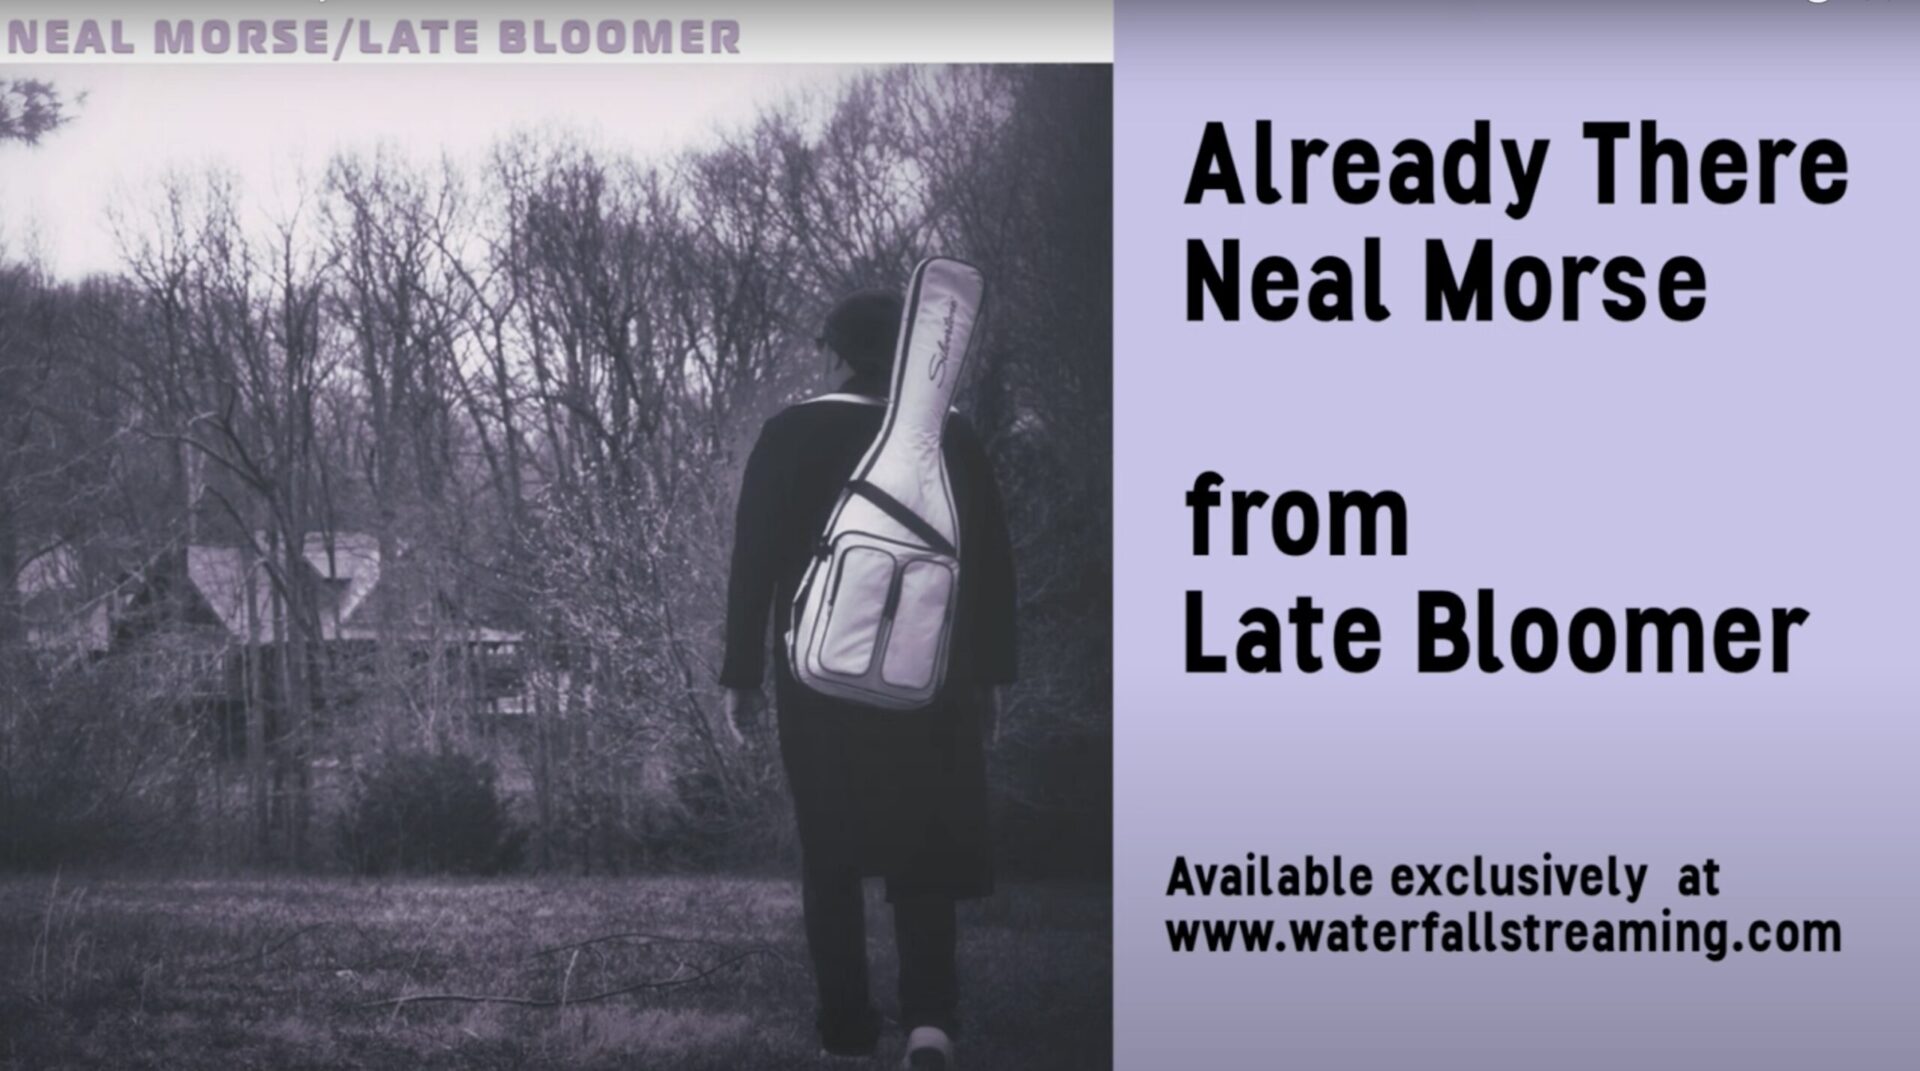 Neal Morse shares new track "Already There" from new singer-songwriter album 'Late Bloomer'